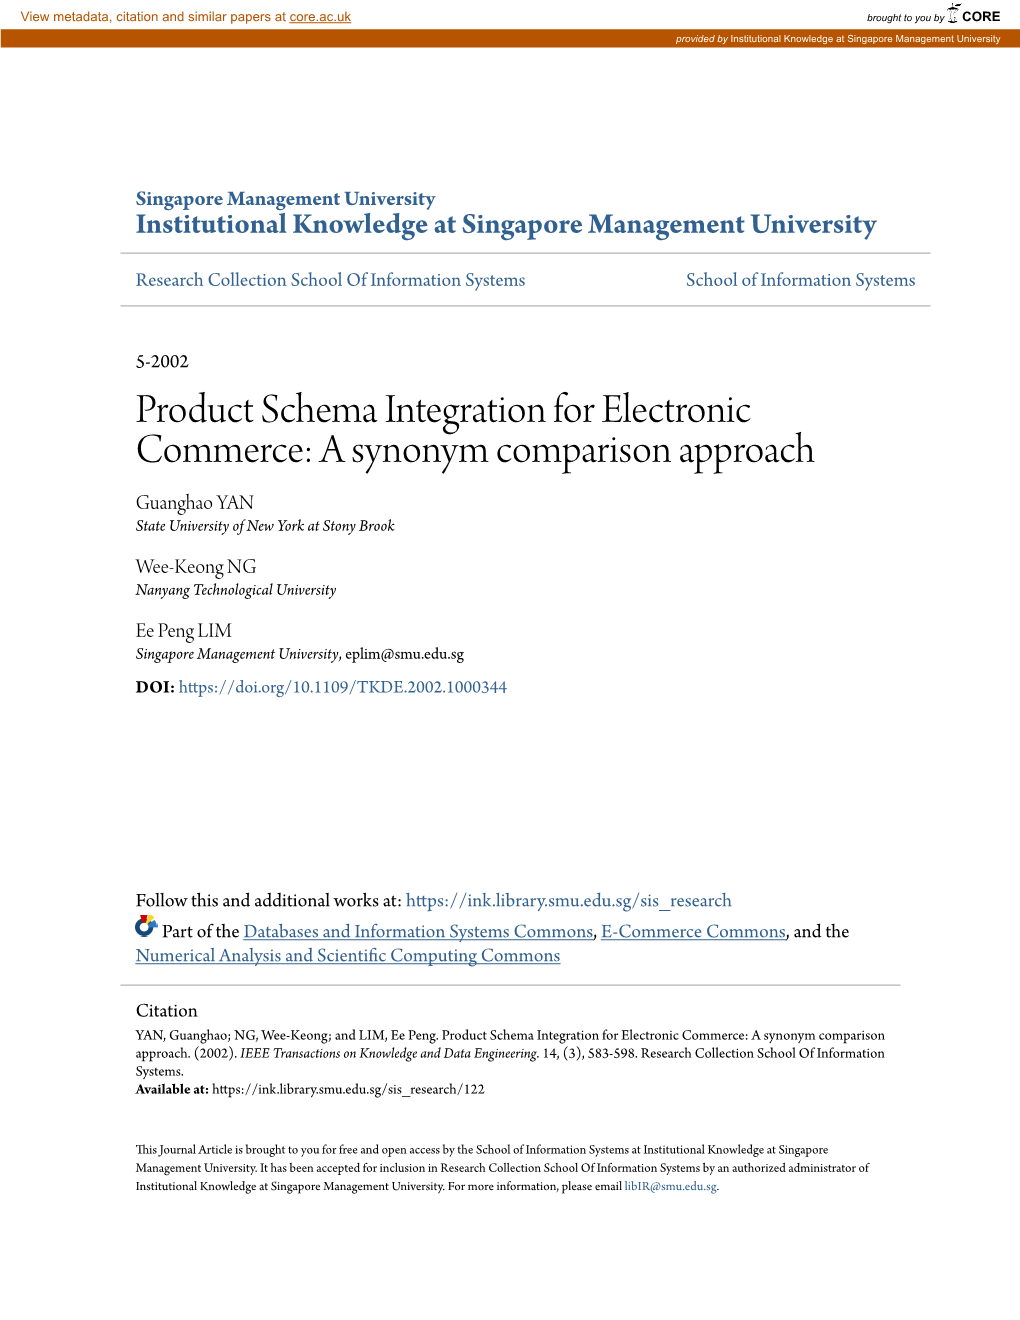 Product Schema Integration for Electronic Commerce: a Synonym Comparison Approach Guanghao YAN State University of New York at Stony Brook